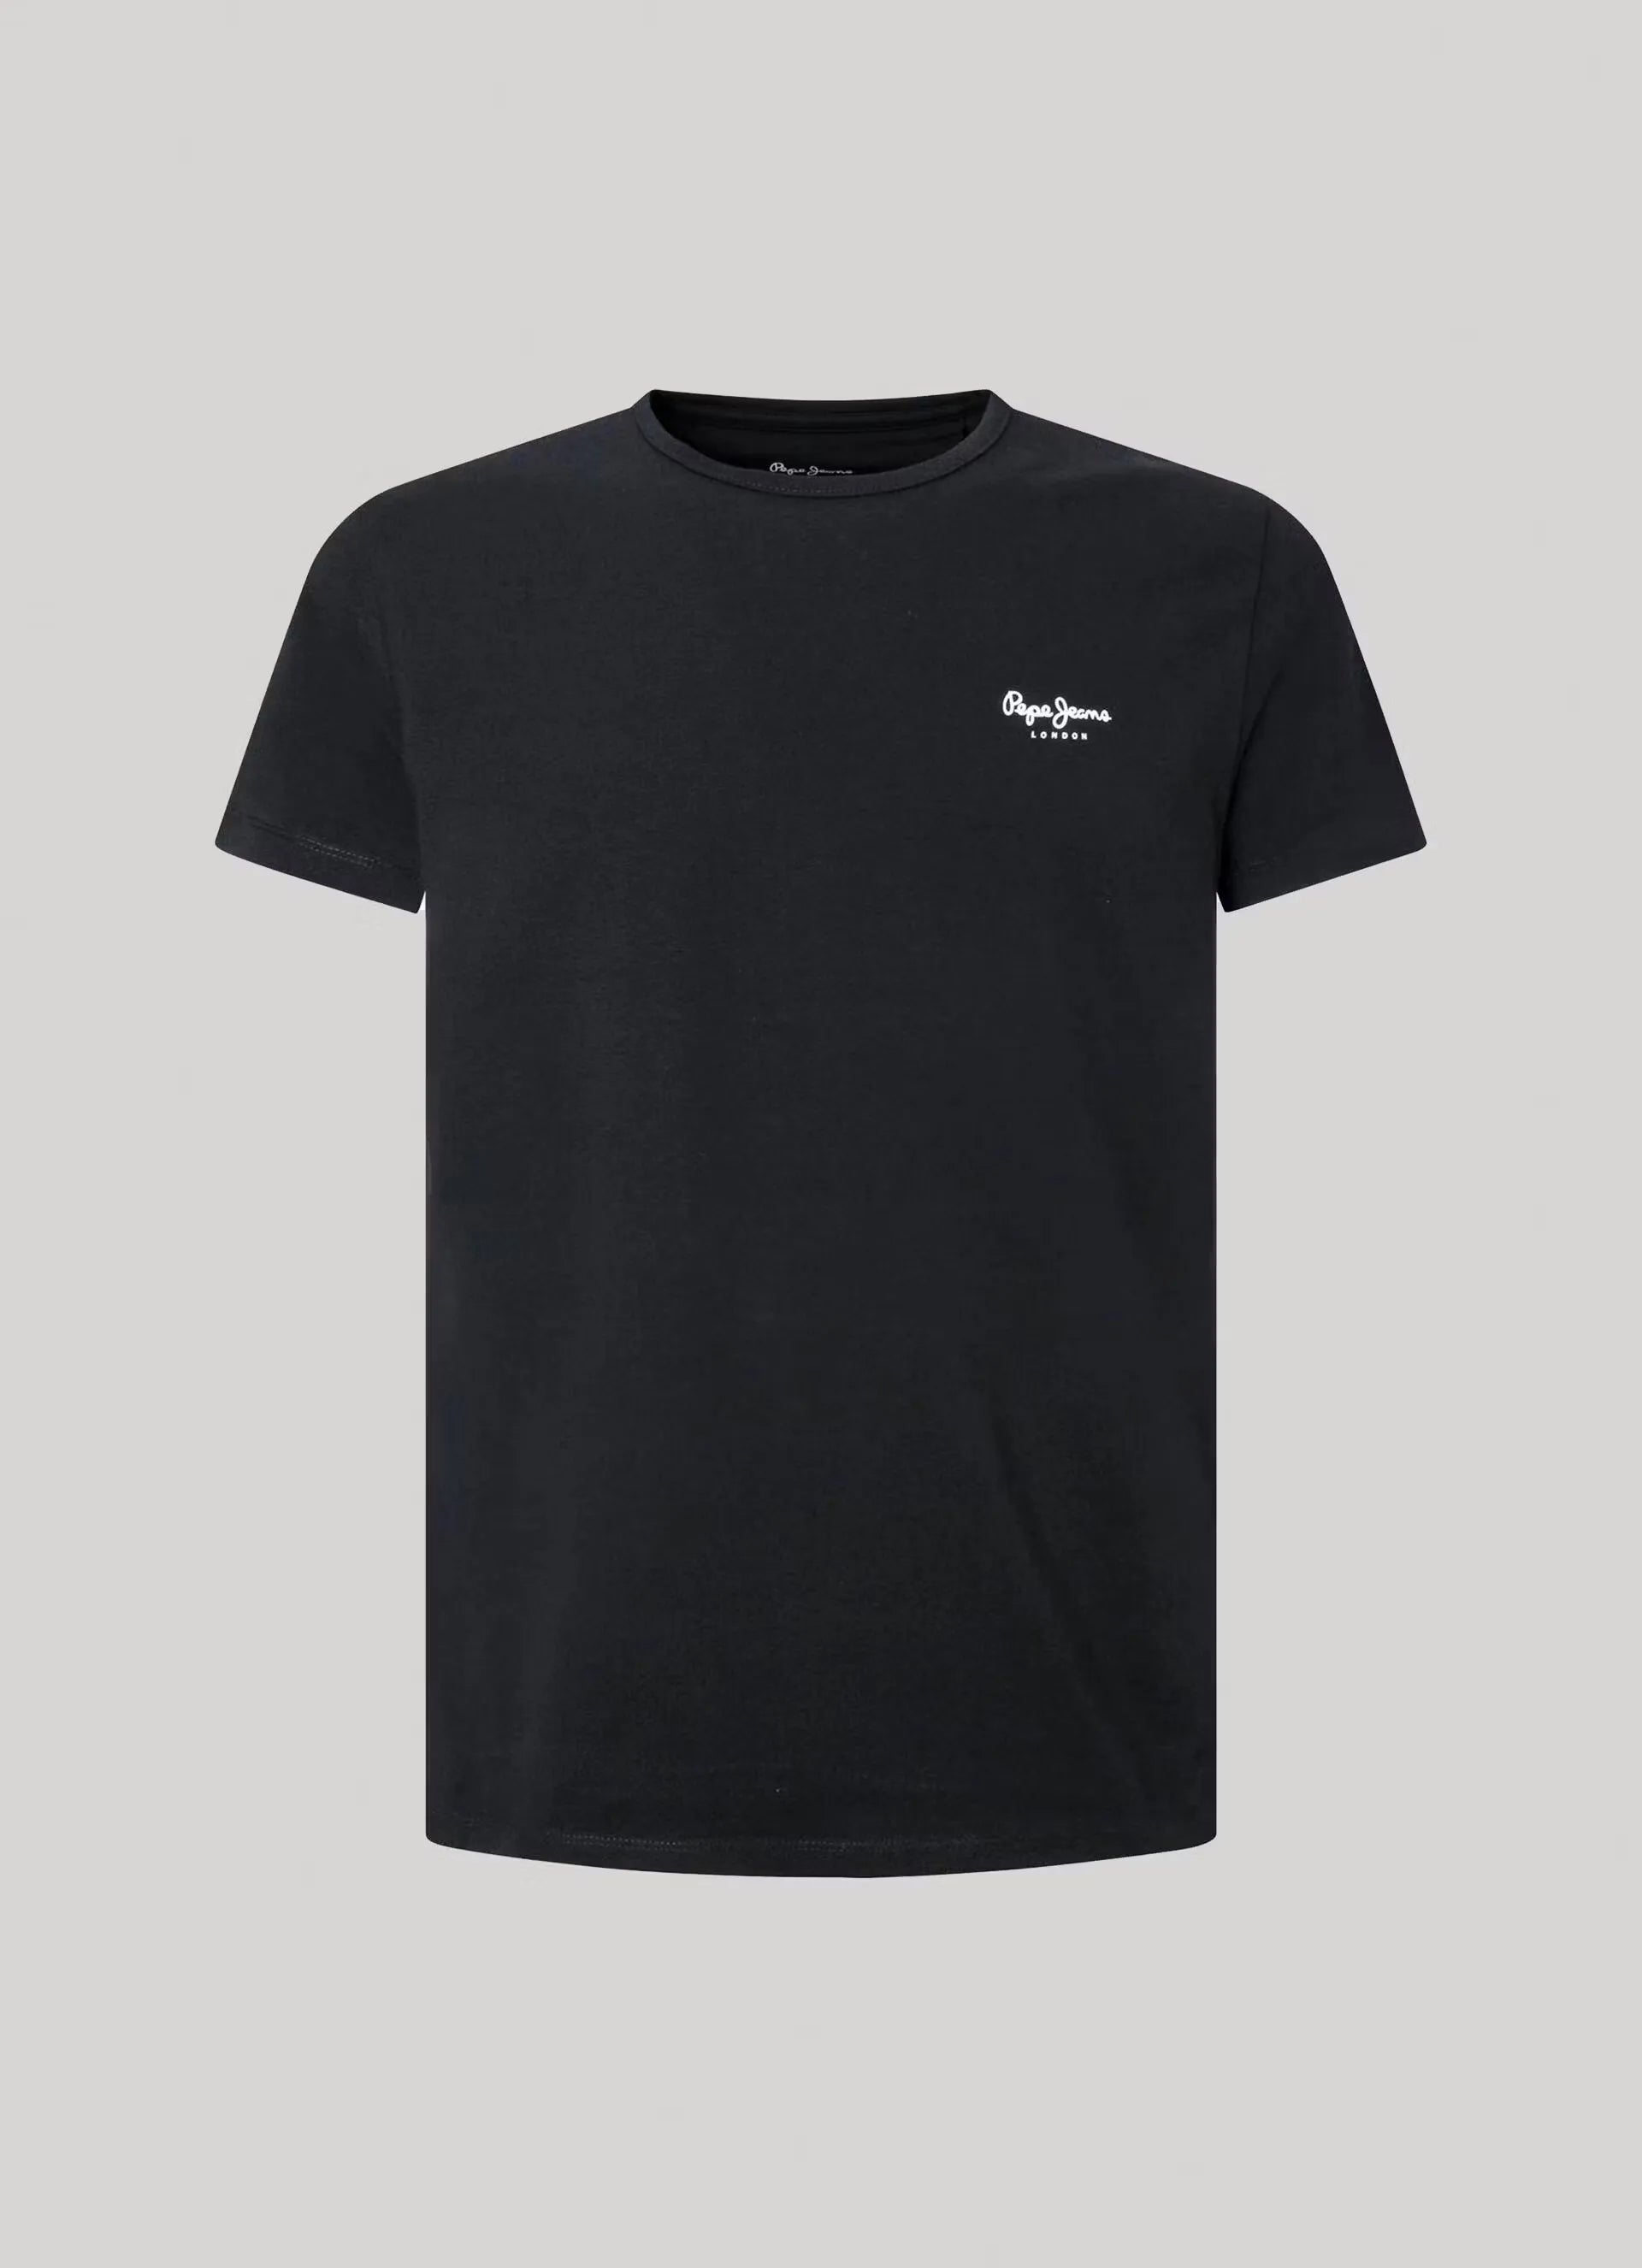 Men's black Pepe Jeans t-shirt crafted from comfortable cotton. Classic design with crew neck and signature logo, perfect for casual wear. Shop Dubailisit!